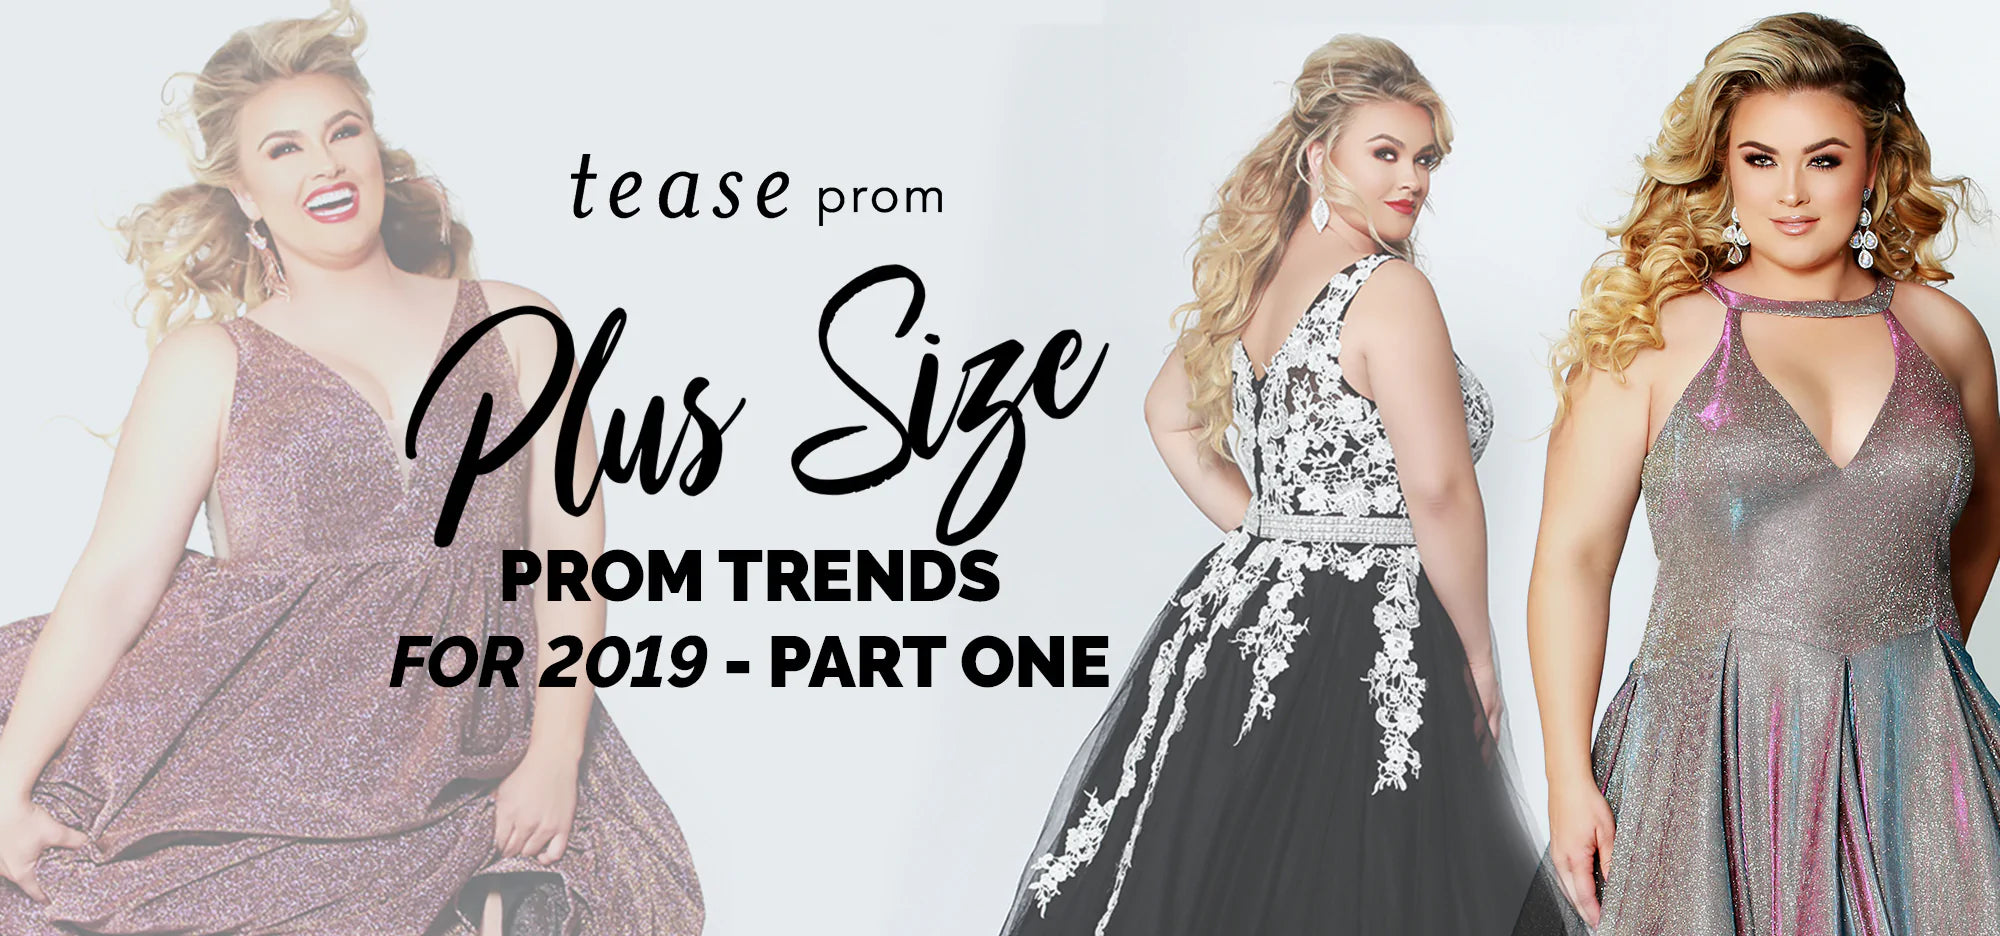 Plus Size Prom Trends for 2019